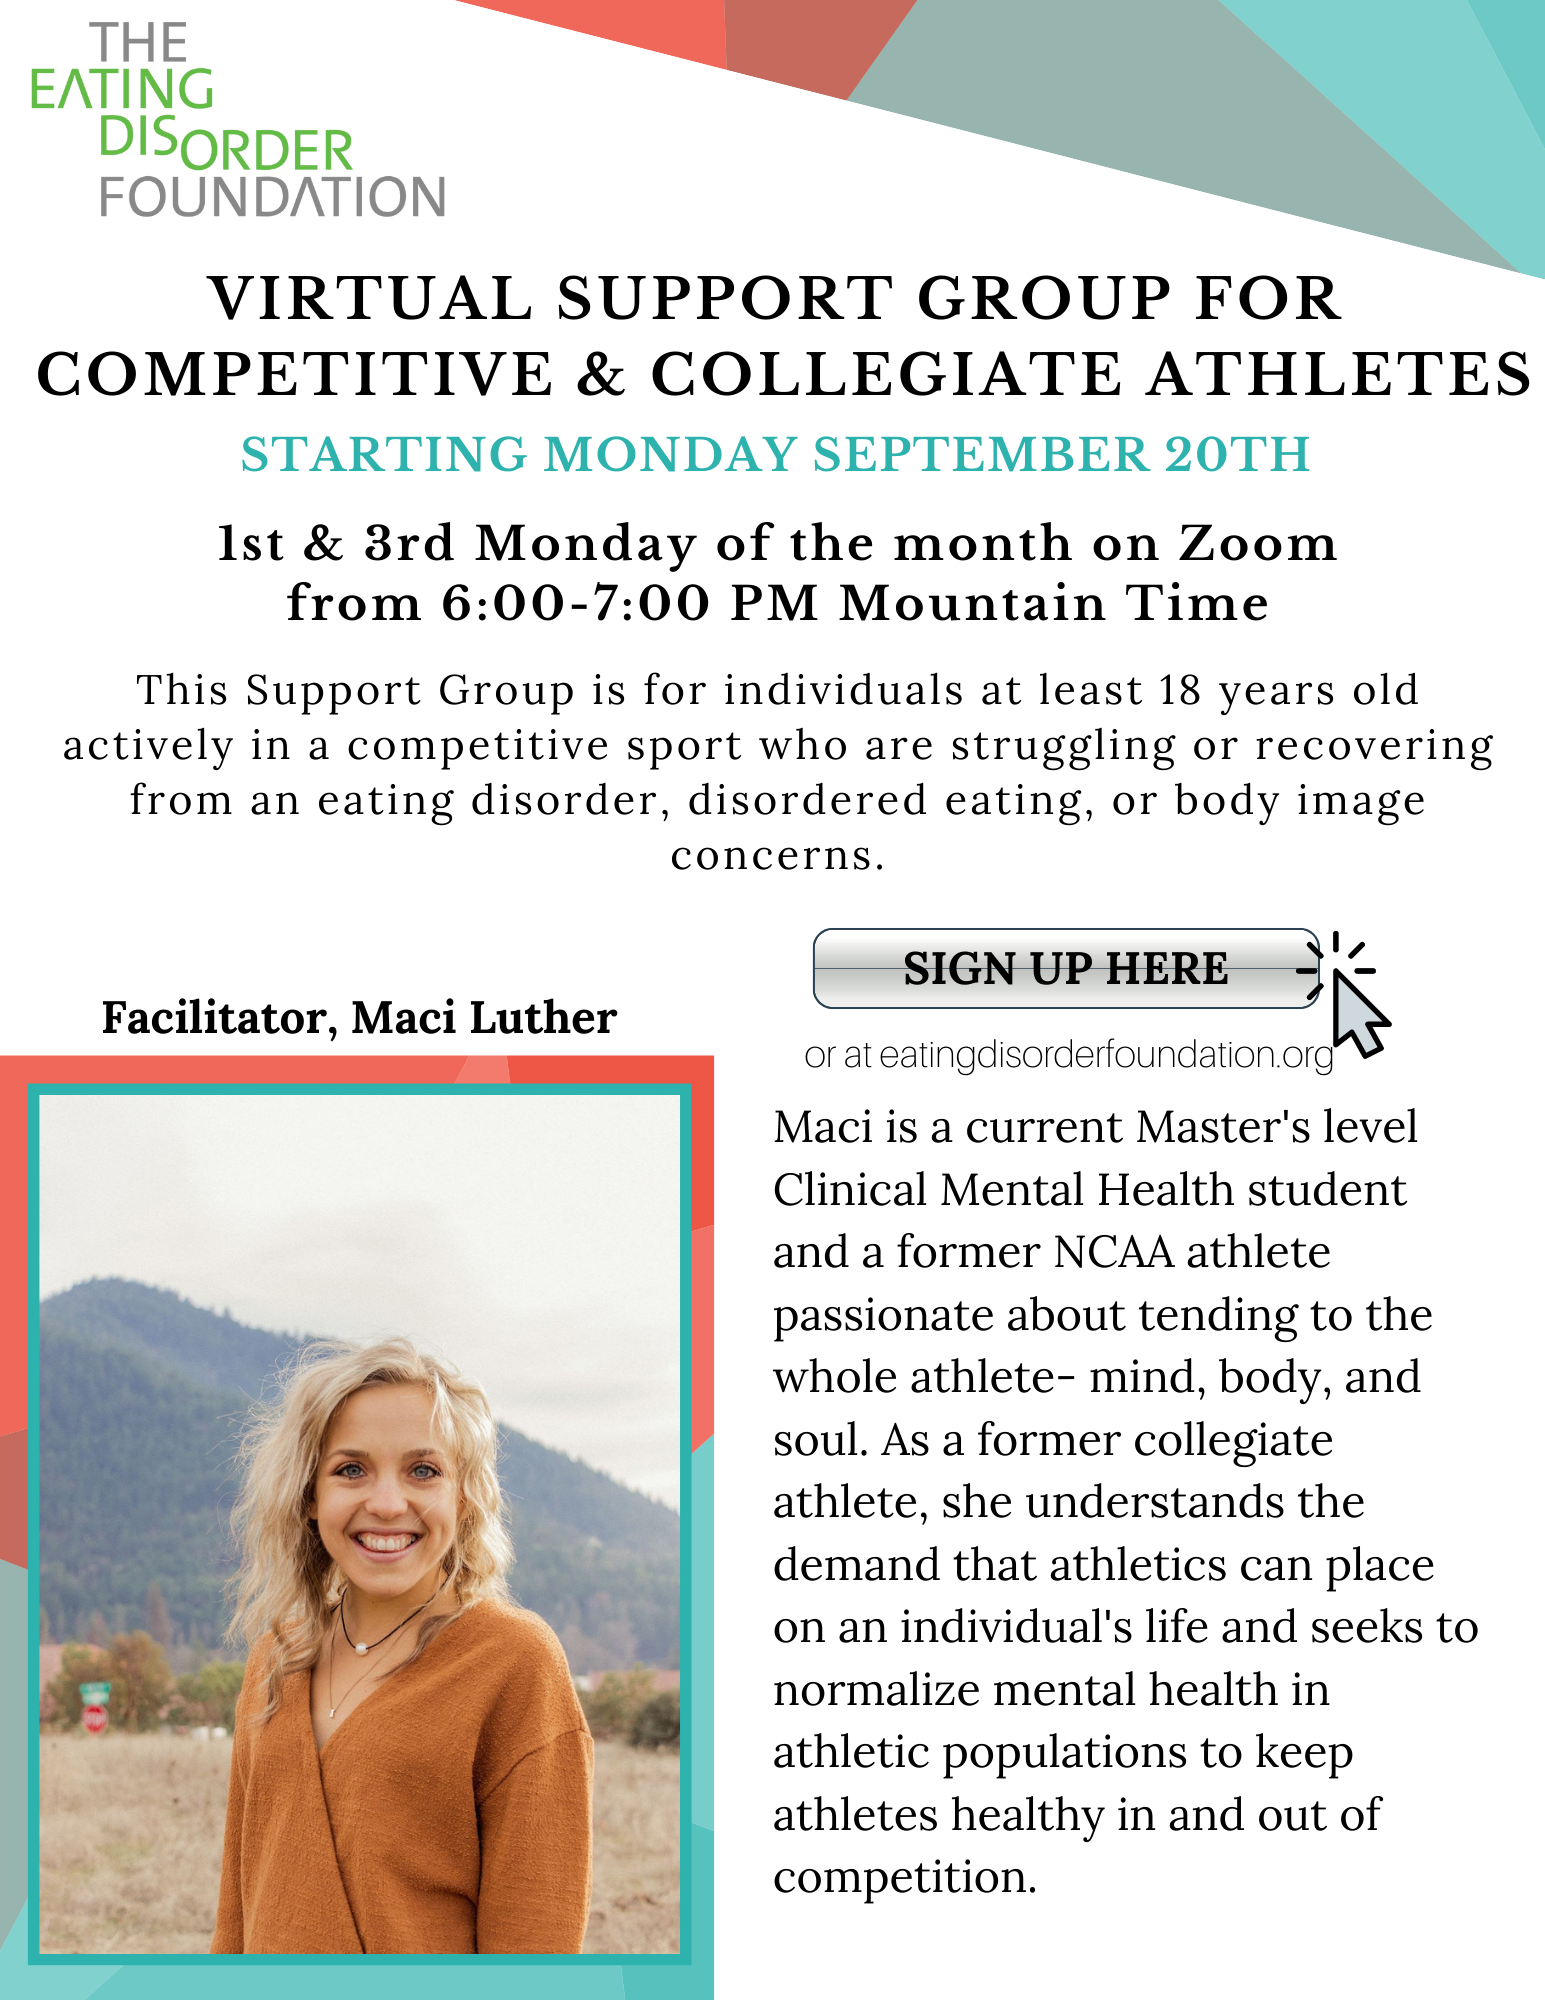 Virtual Support Group for Competitive and Collegiate Athletes @ Virtual